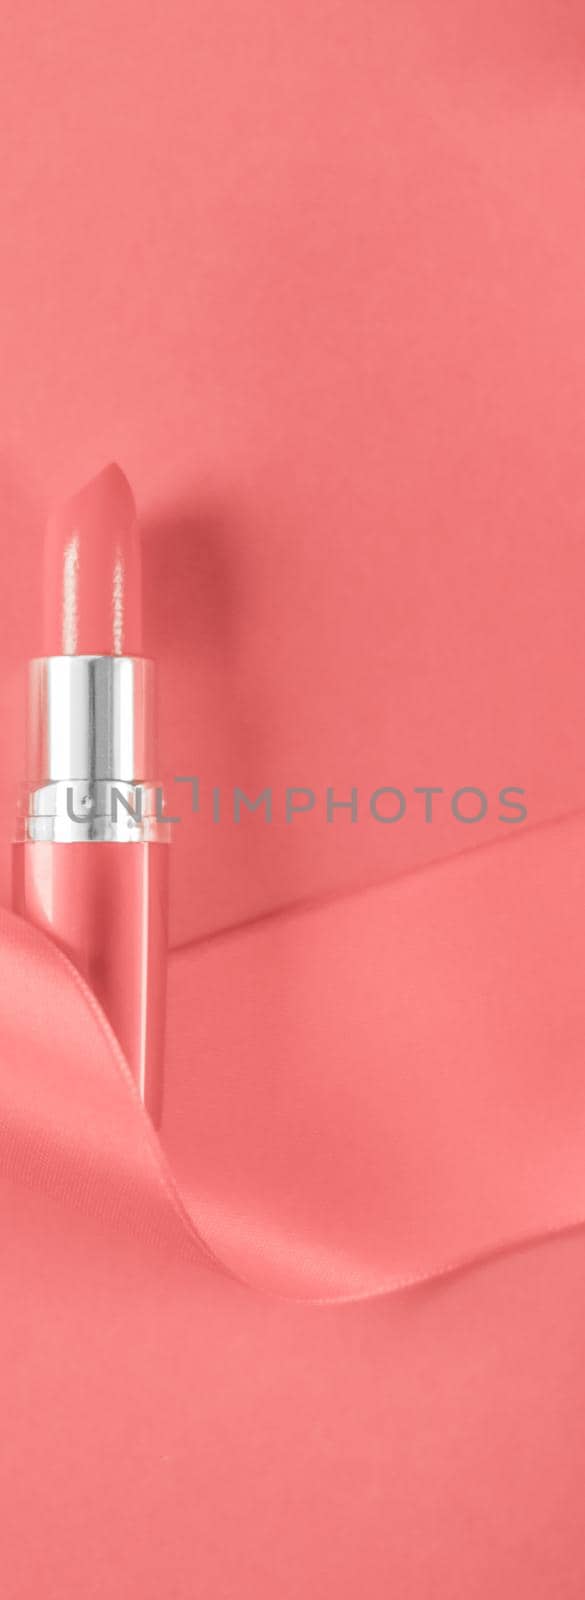 Luxury lipstick and silk ribbon on coral holiday background, make-up and cosmetics flatlay for beauty brand product design by Anneleven